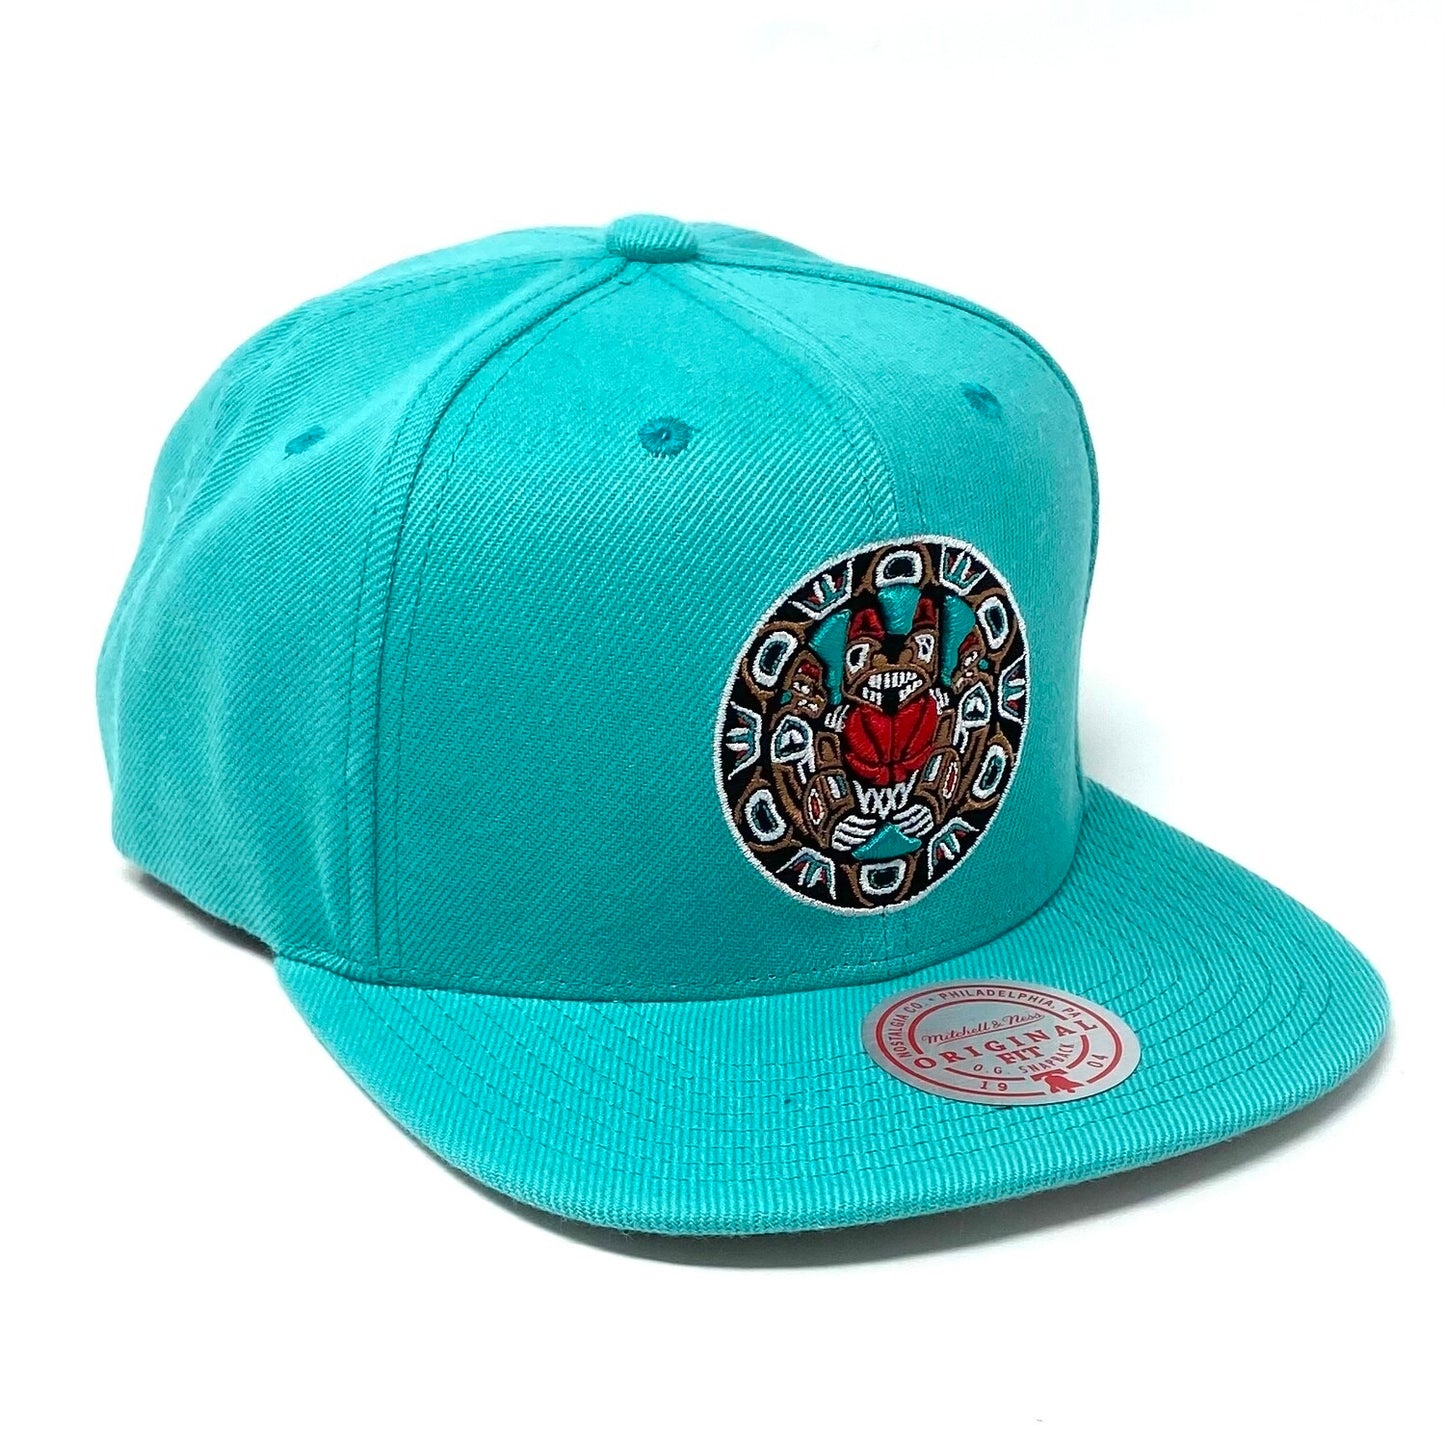 Men's Vancouver Grizzlies Mitchell & Ness Teal Alternate Core Basic Adjustable Snapback Hat